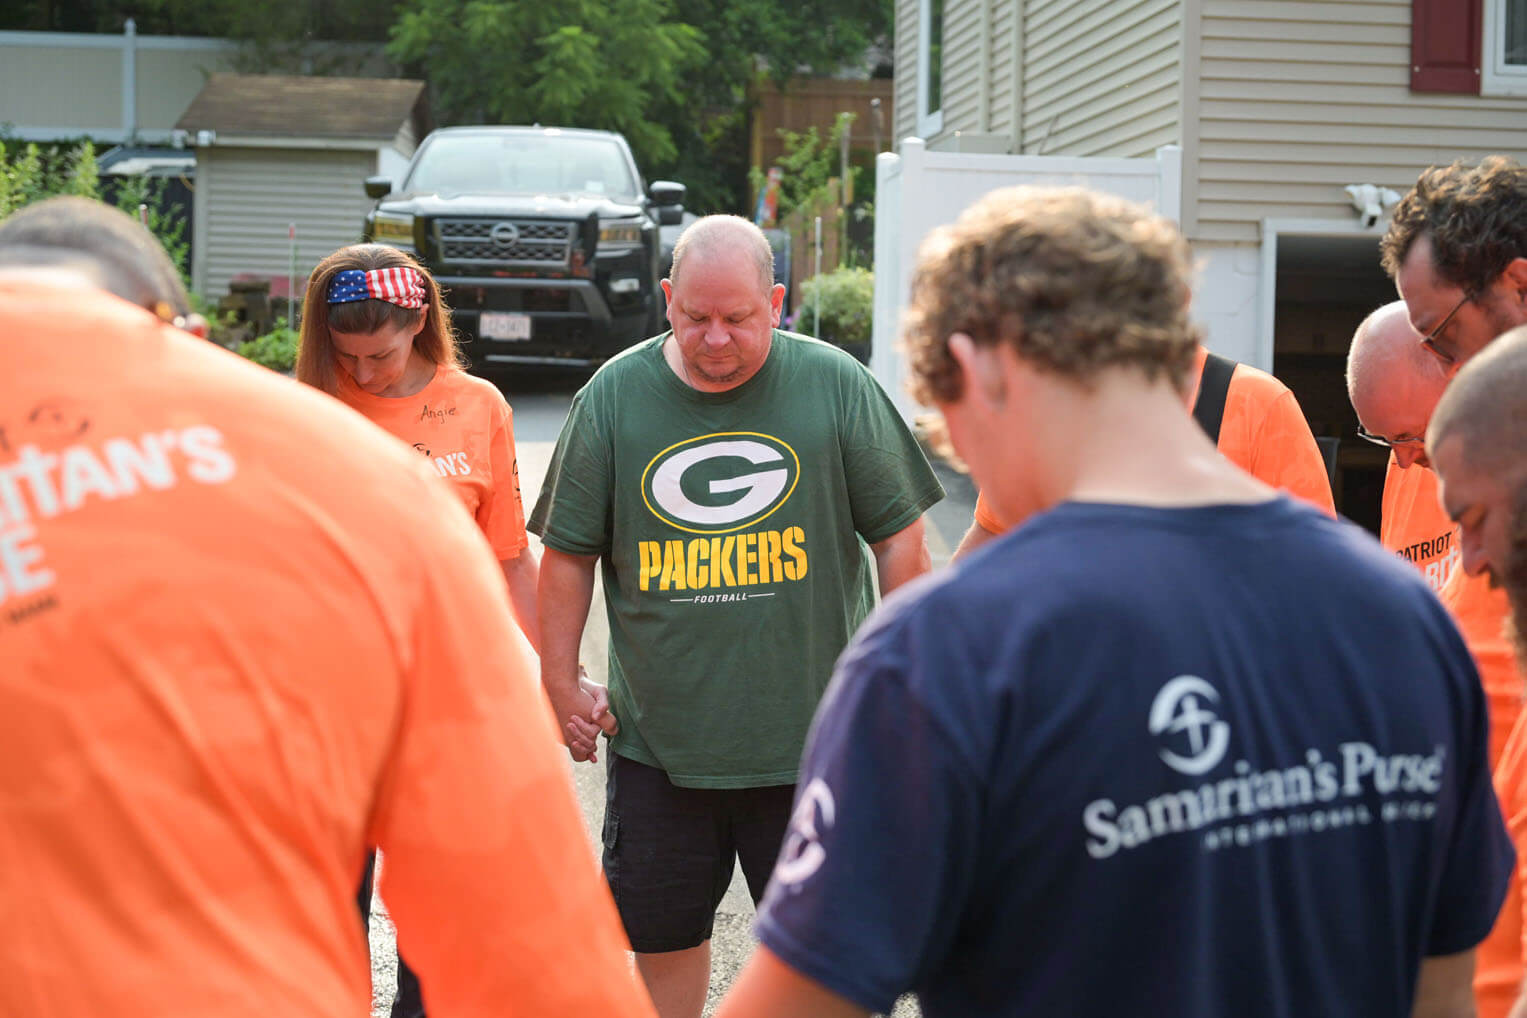 Volunteers pray with homeowner Joe Bartel after helping him clear his flooded home.